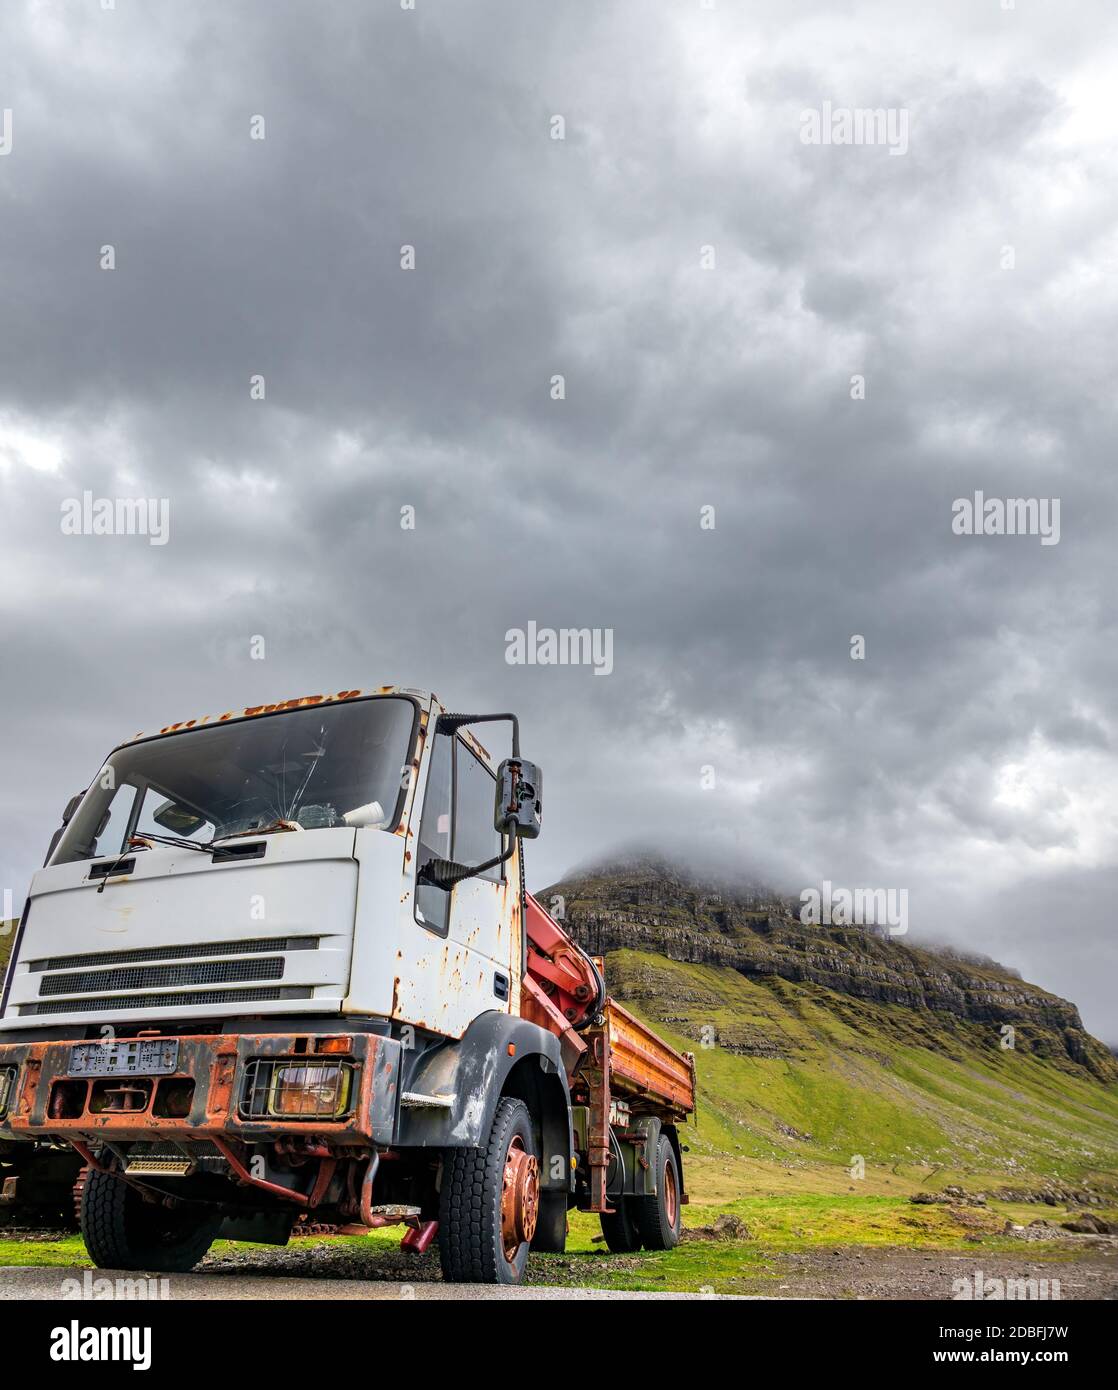 Old ruined truck abandoned near the mountains Stock Photo